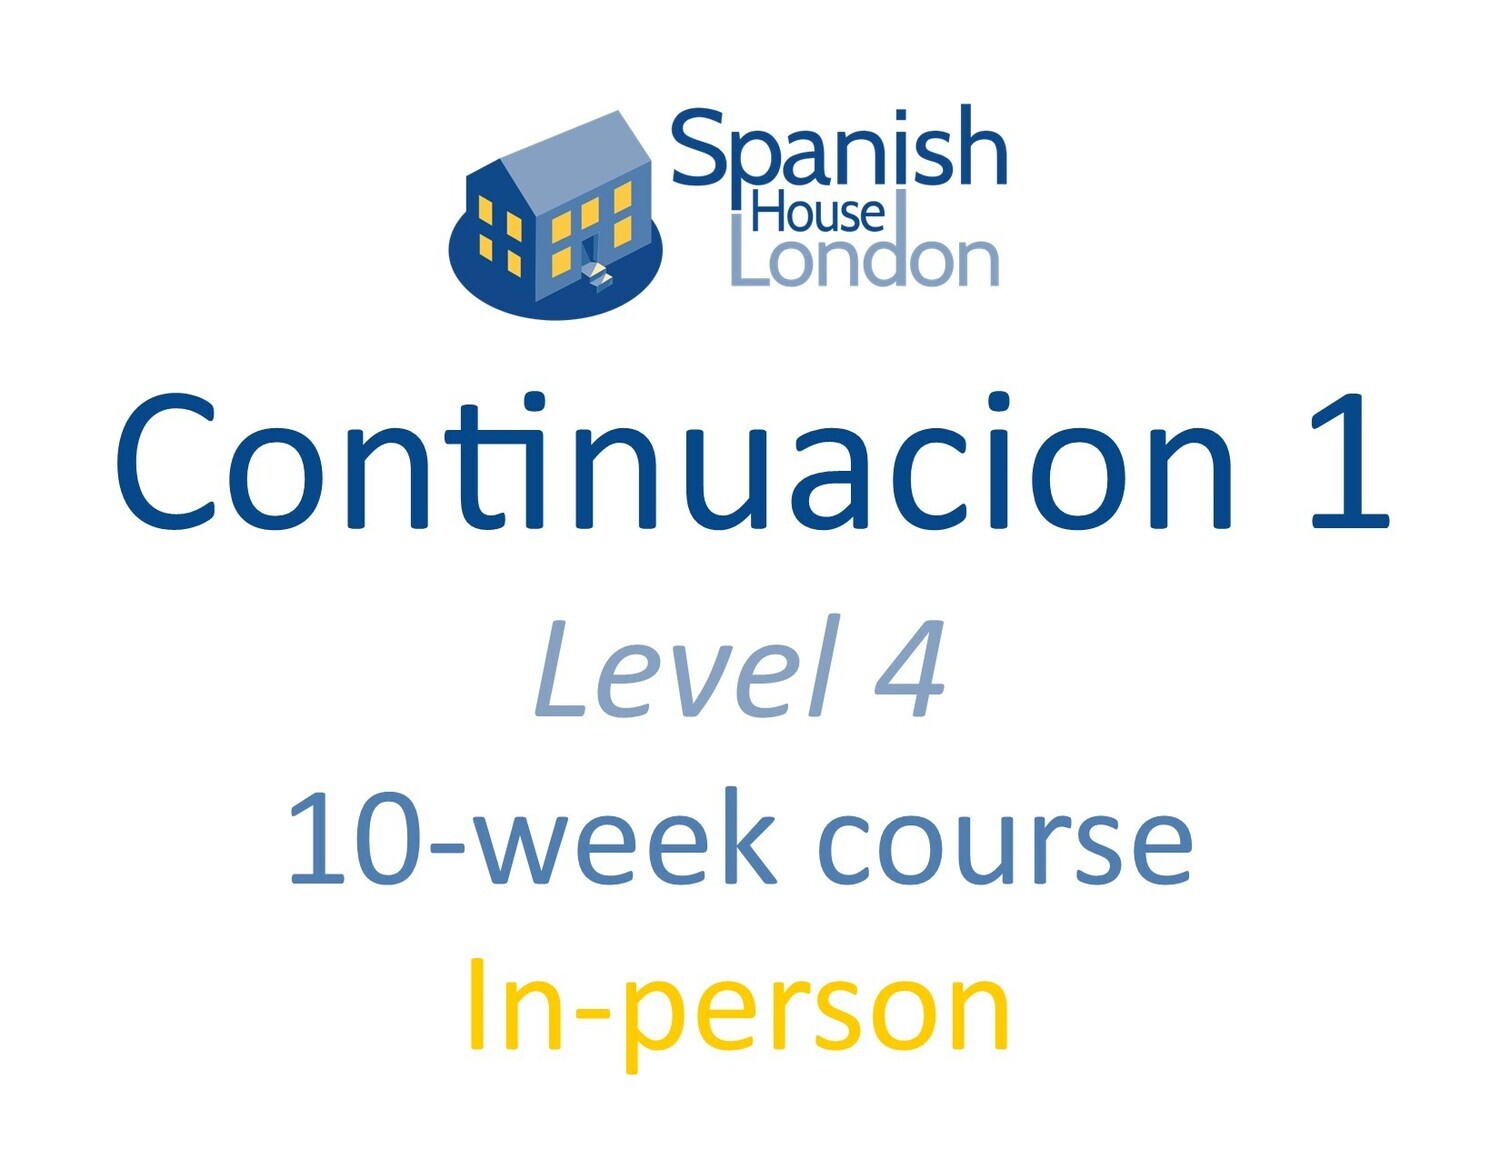 Continuacion 1 Course starting on 8th August at 6pm in Euston / King's Cross